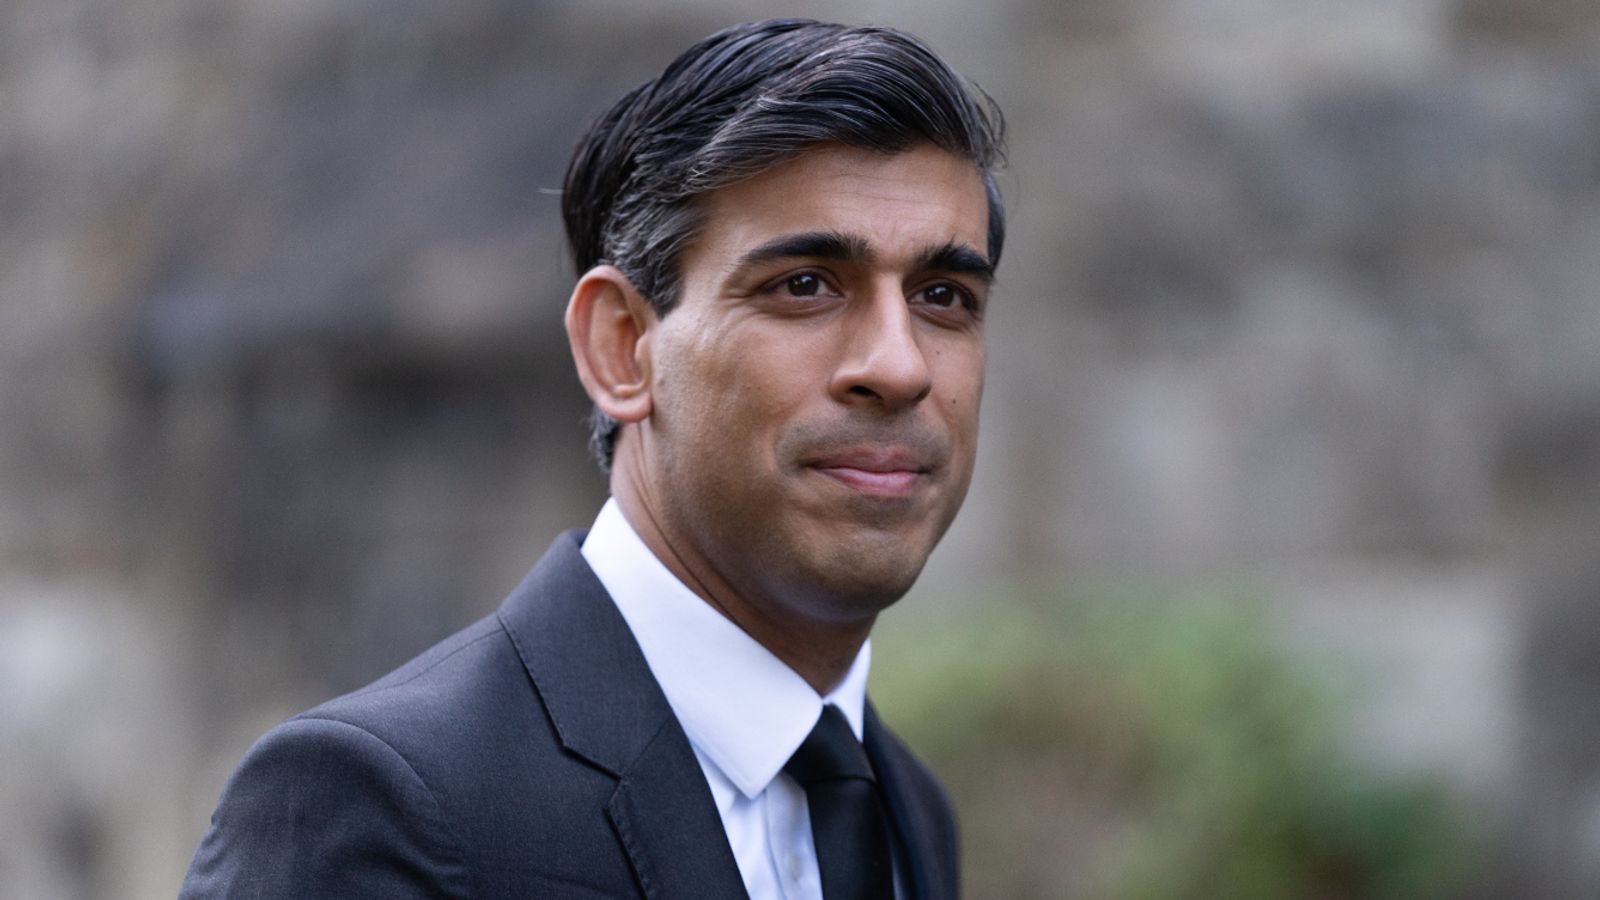 Autumn budget 2021: Rishi Sunak unveils new spending pledges including £5bn for health research and innovation and £3bn for skills education